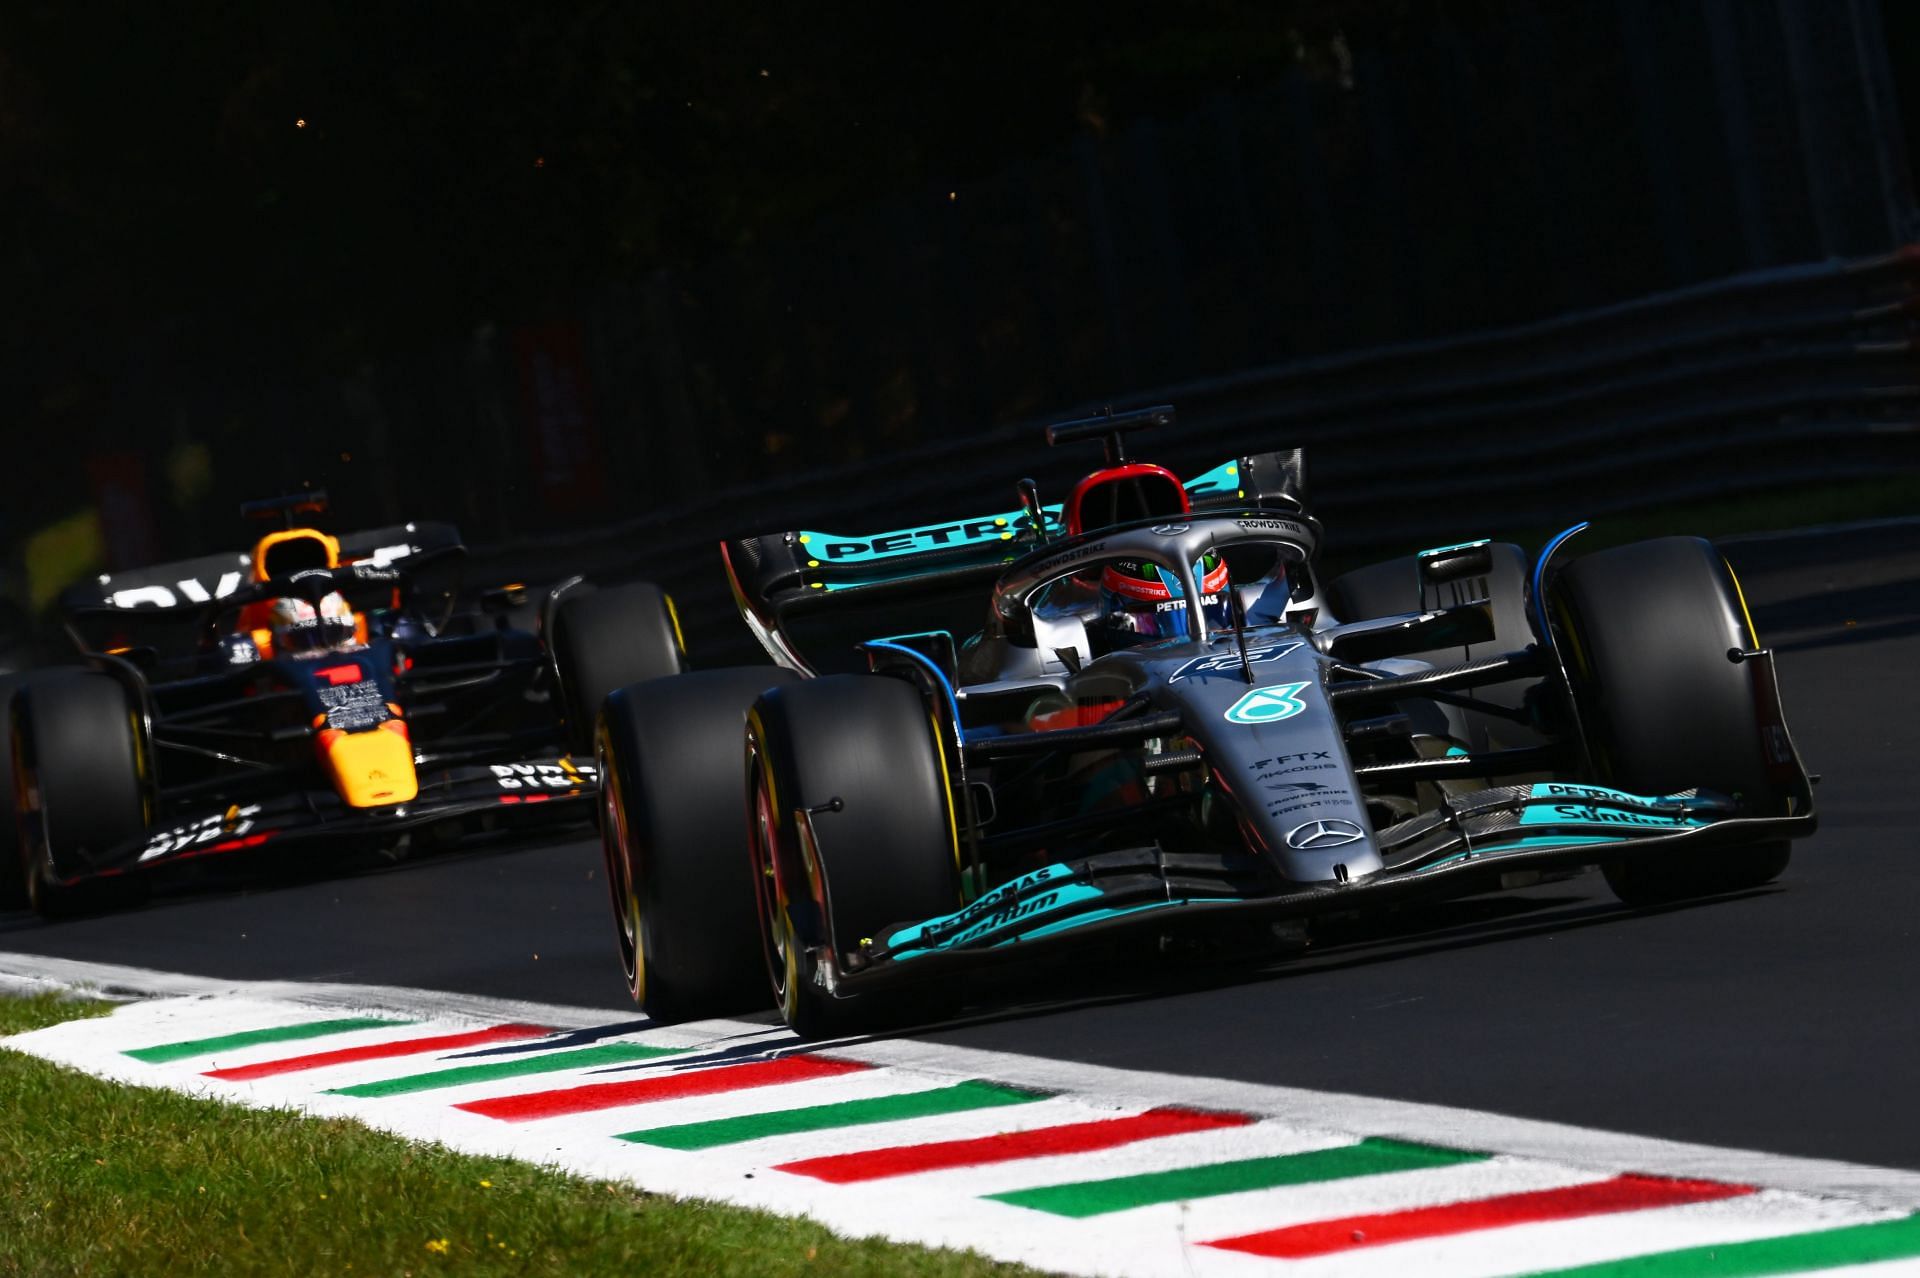 F1 Grand Prix of Italy - Final Practice